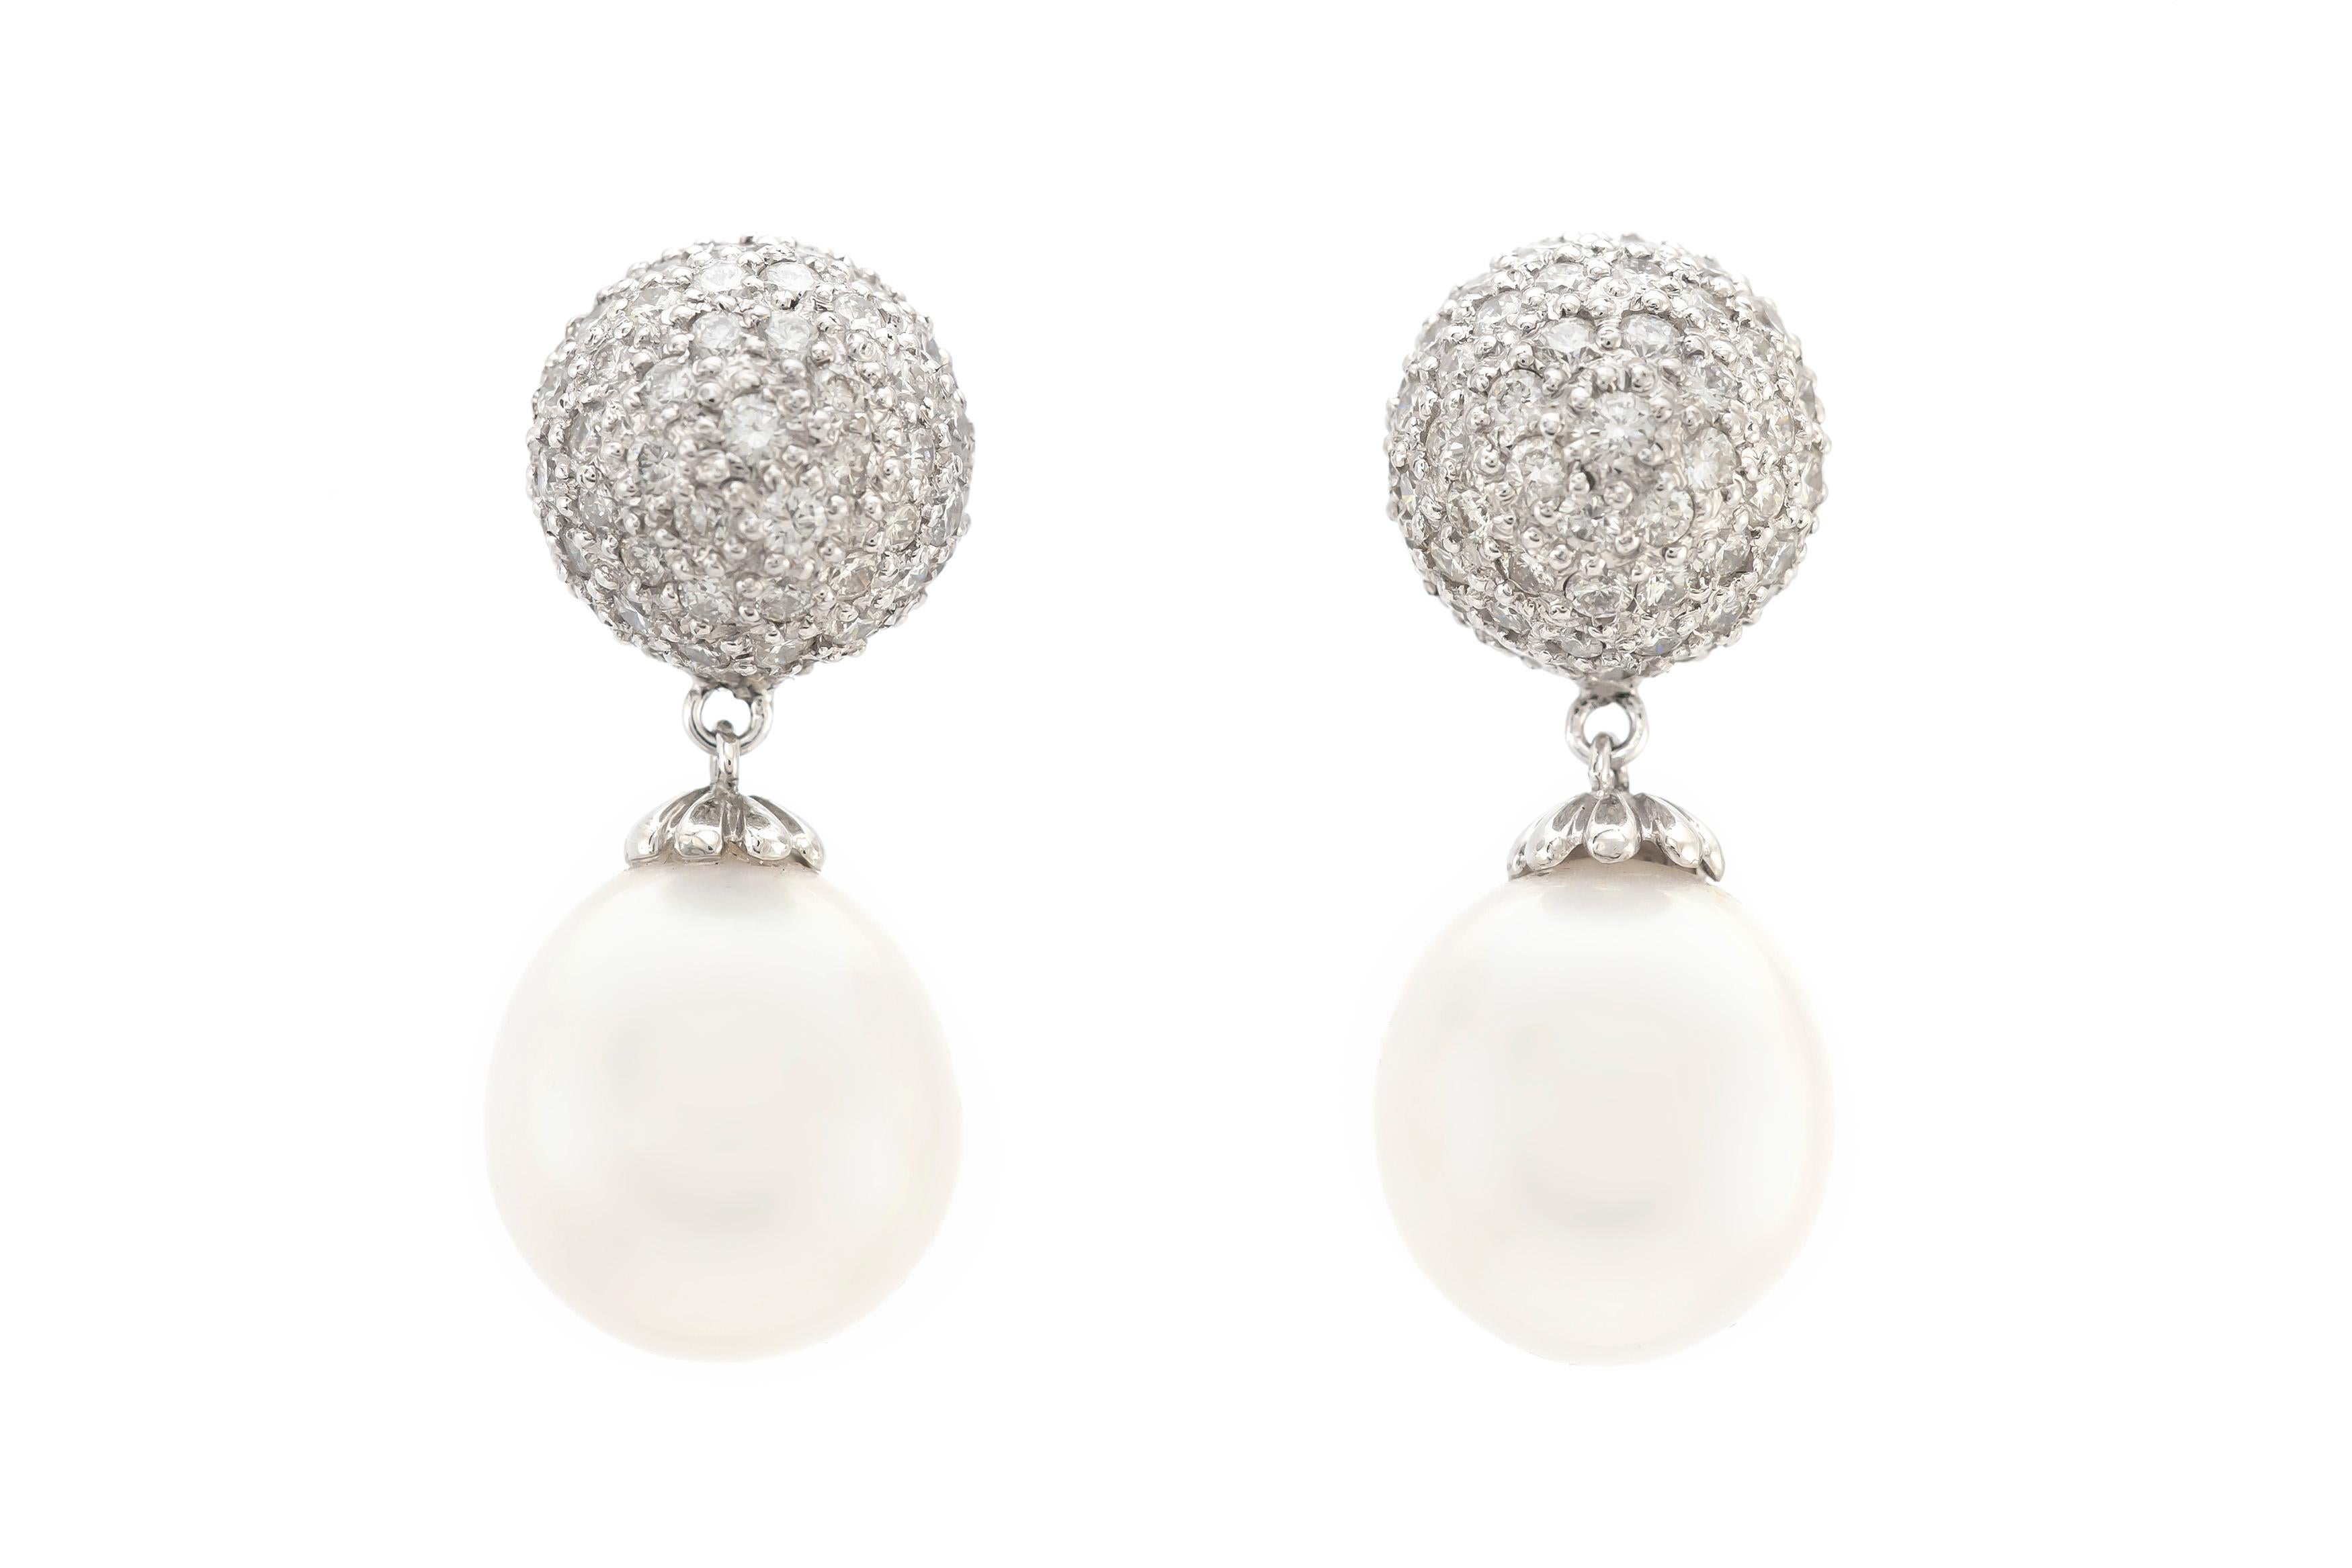 The earrings are finely crafted in 18k white gold with two beautiful South Sea pearls and with diamonds weighing approximately total of 3.41 carat.